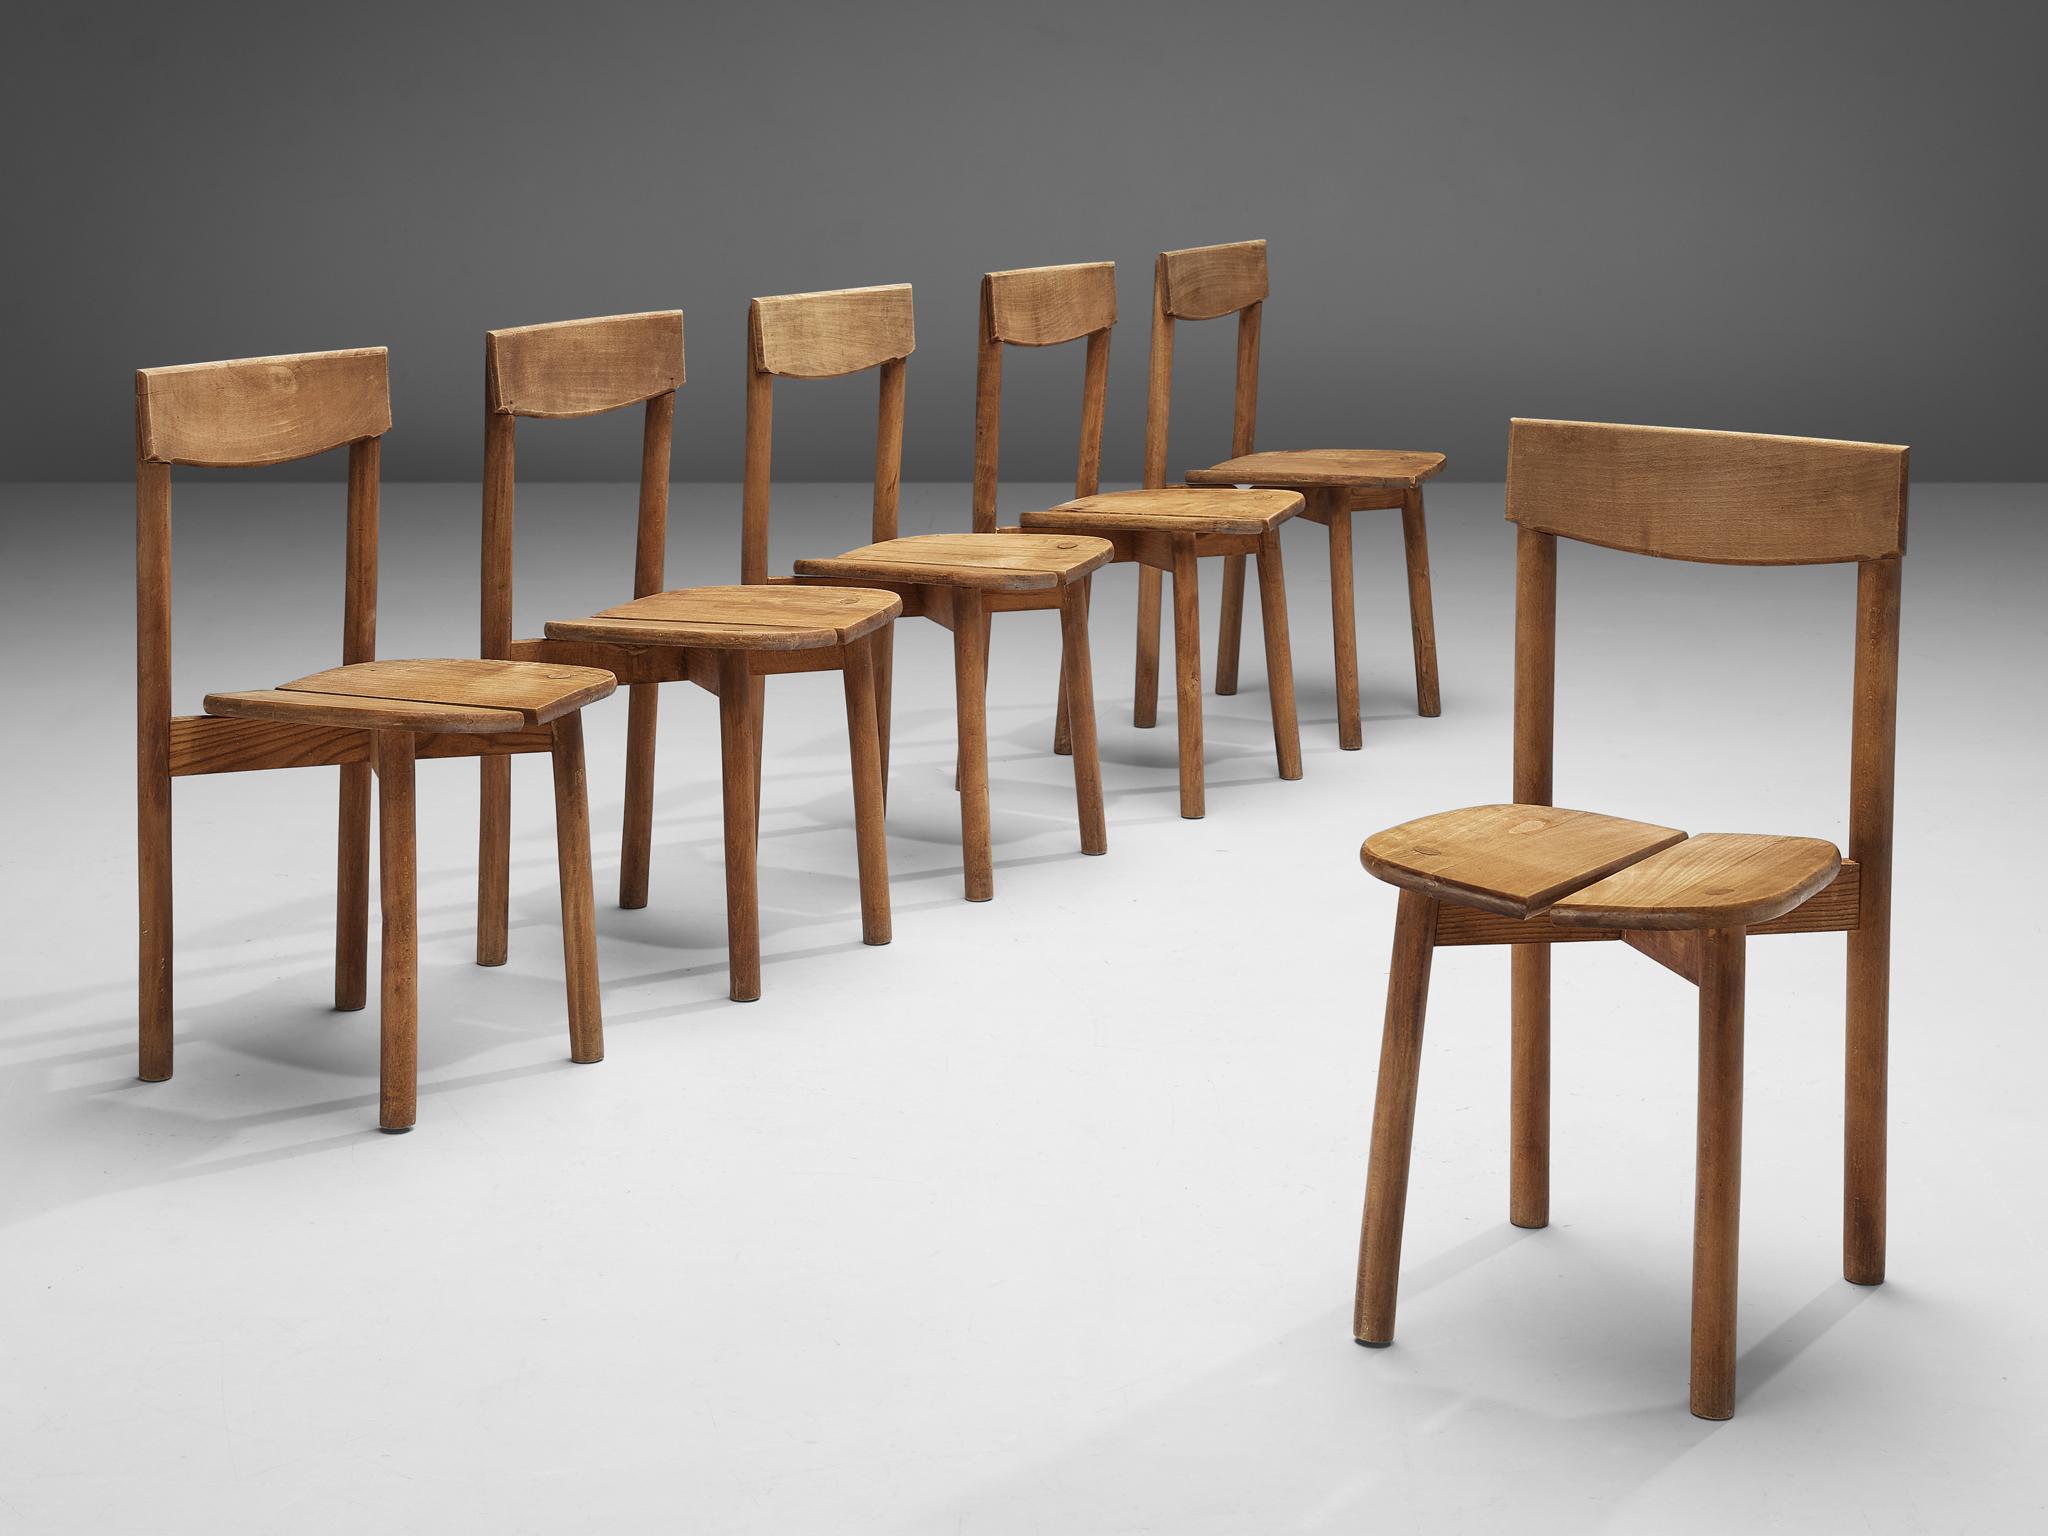 Pierre Gautier-Delaye, set of six dining chairs, beech, France, 1960s

This set of subtle and modest dining chairs are executed in stained beechwood. The seating area is divided into two organically shaped slats and is detailed with wood-joints on